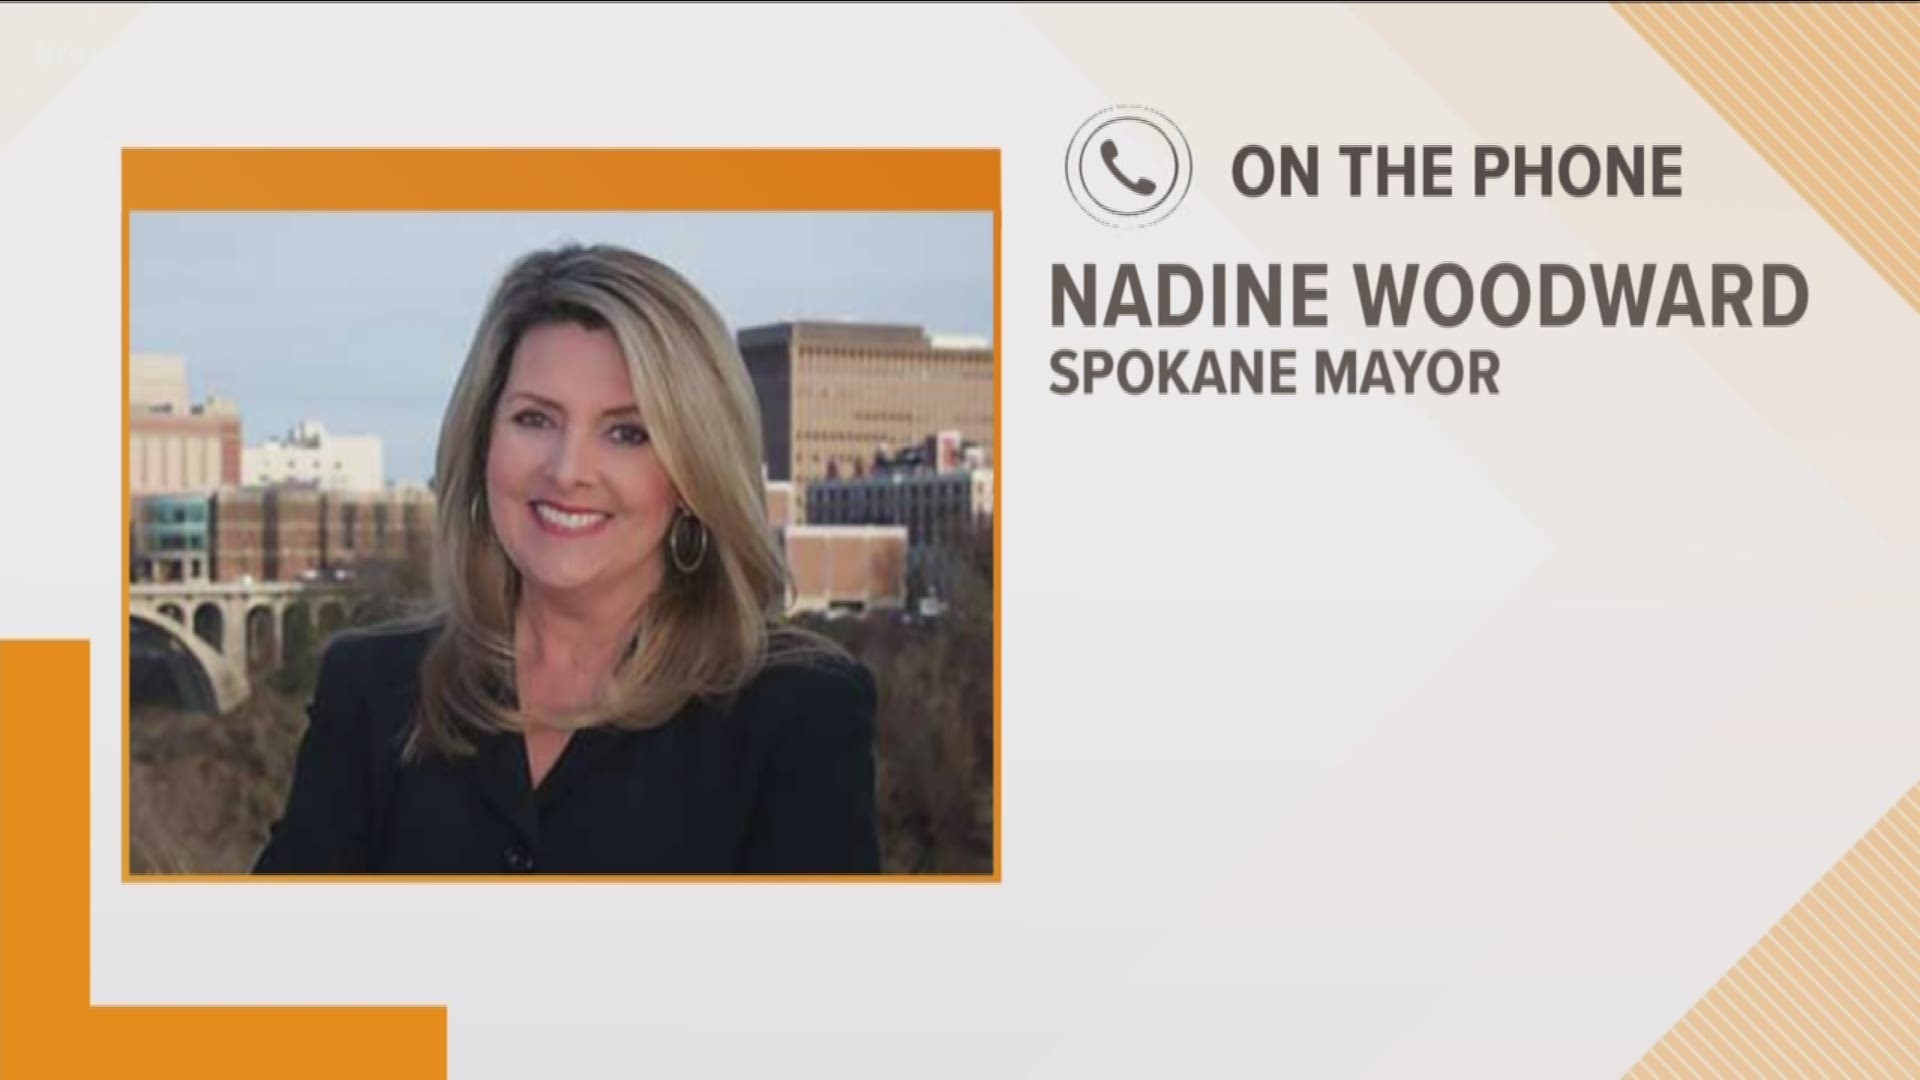 Spokane Mayor Nadine Woodward spoke live on Up with KREM about how Spokane County's first weekend in Phase 2 went for businesses and customers